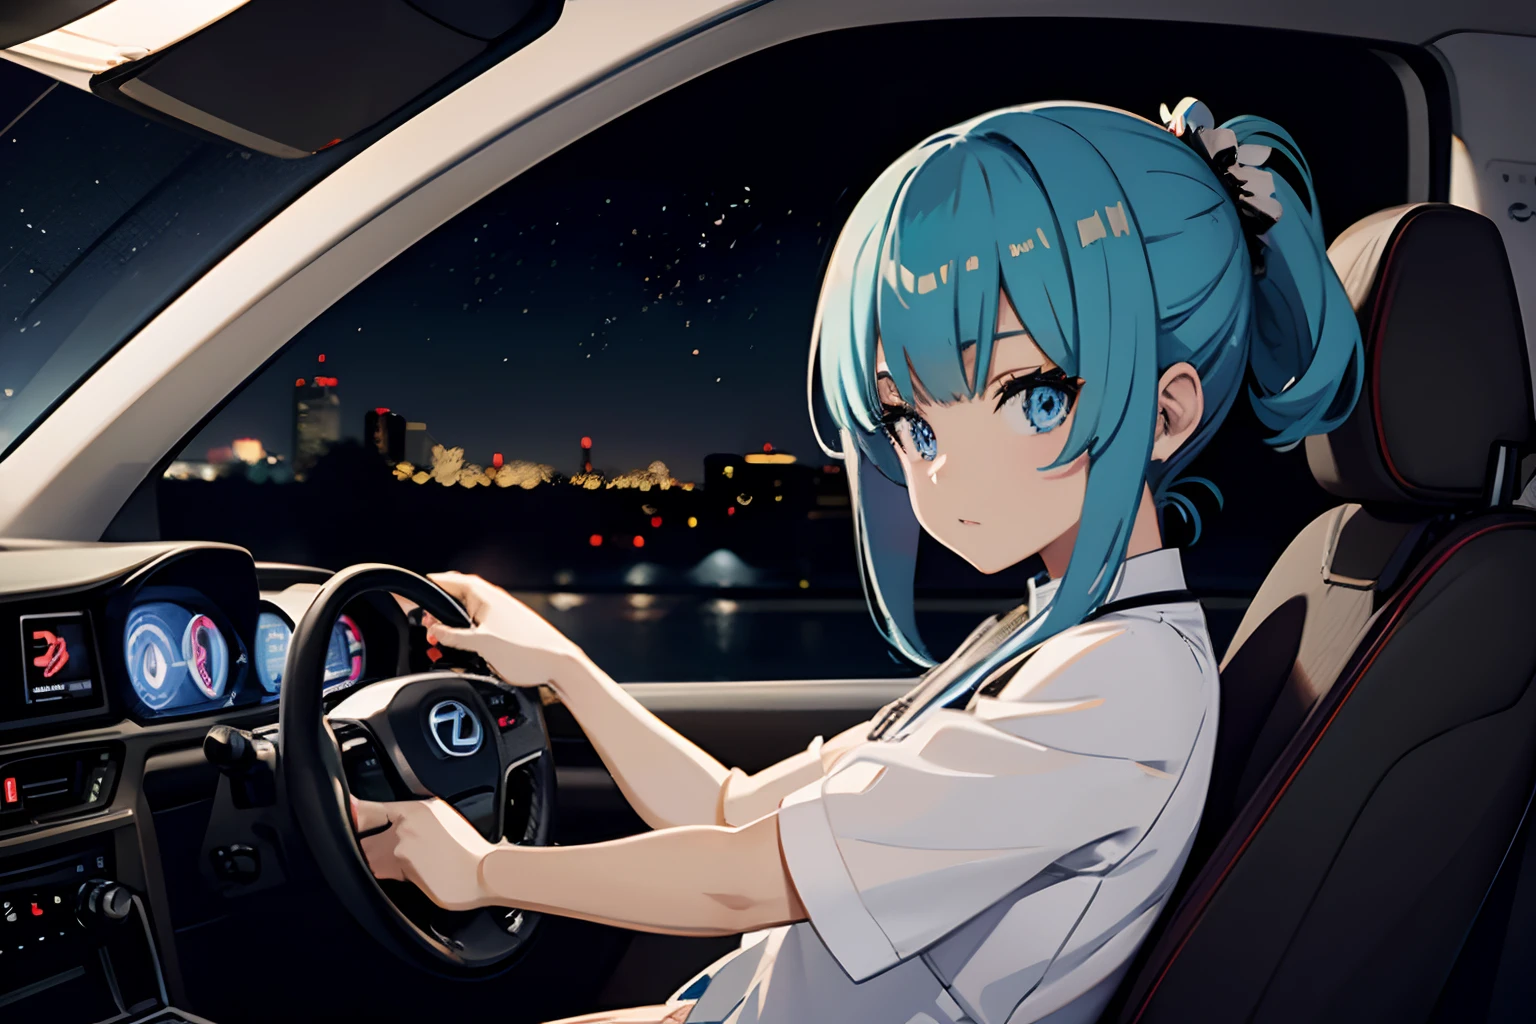 anime girl driving car, interior of JDM Lexus LC, POV from passenger seat, looking at driver, anime girl driving, nighttime,